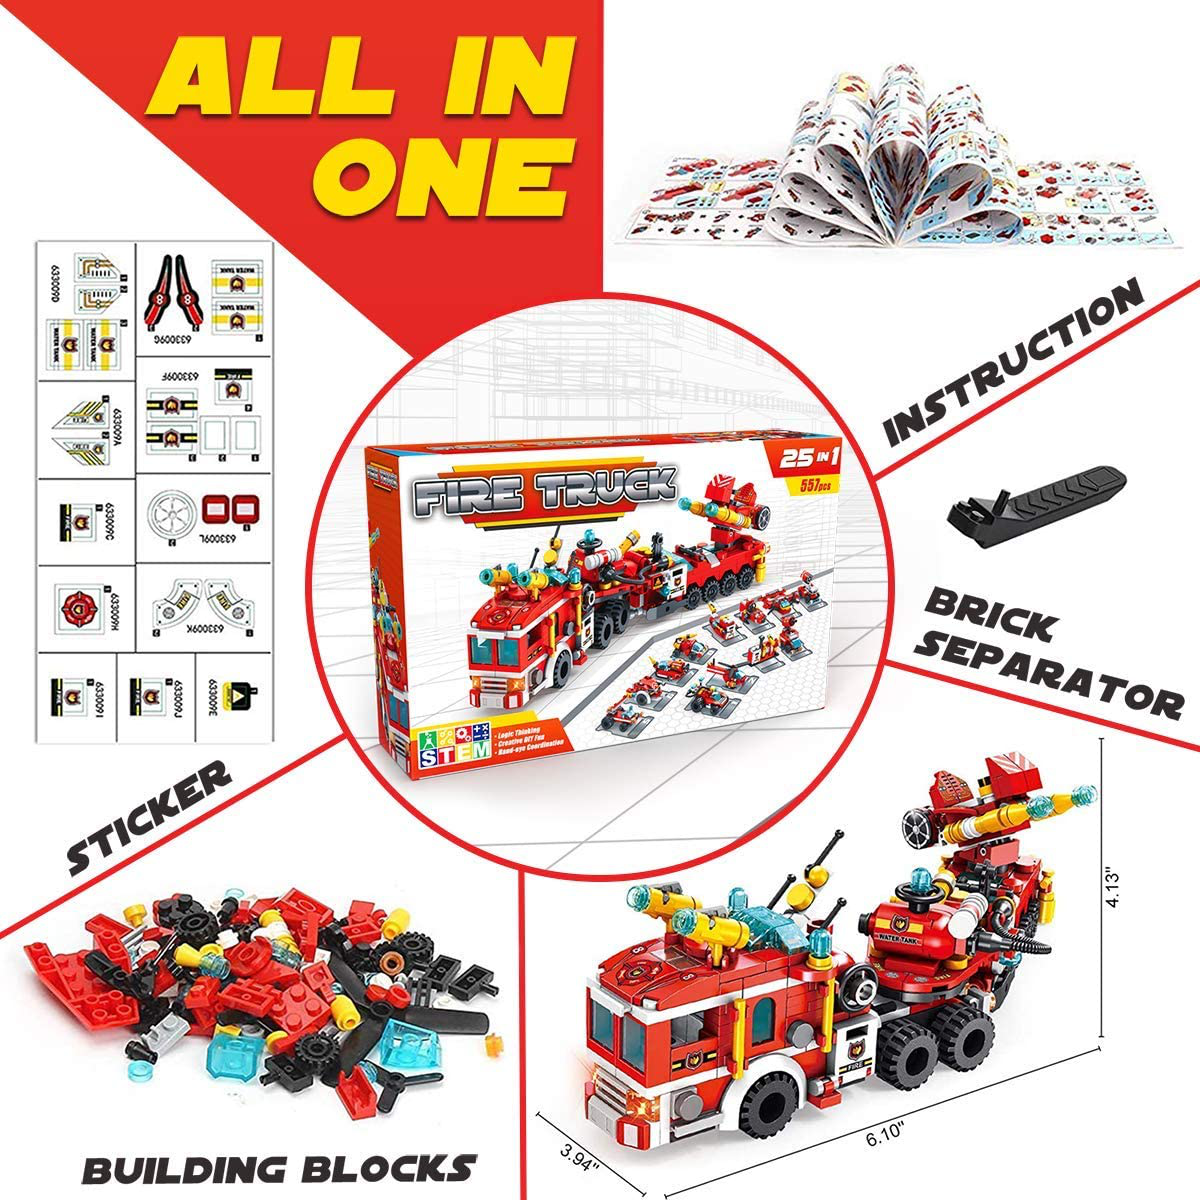 25 in 1 Fire Truck, Boat, Helicopter, Car Toy Building Blocks Model Kit Educational STEM Activities